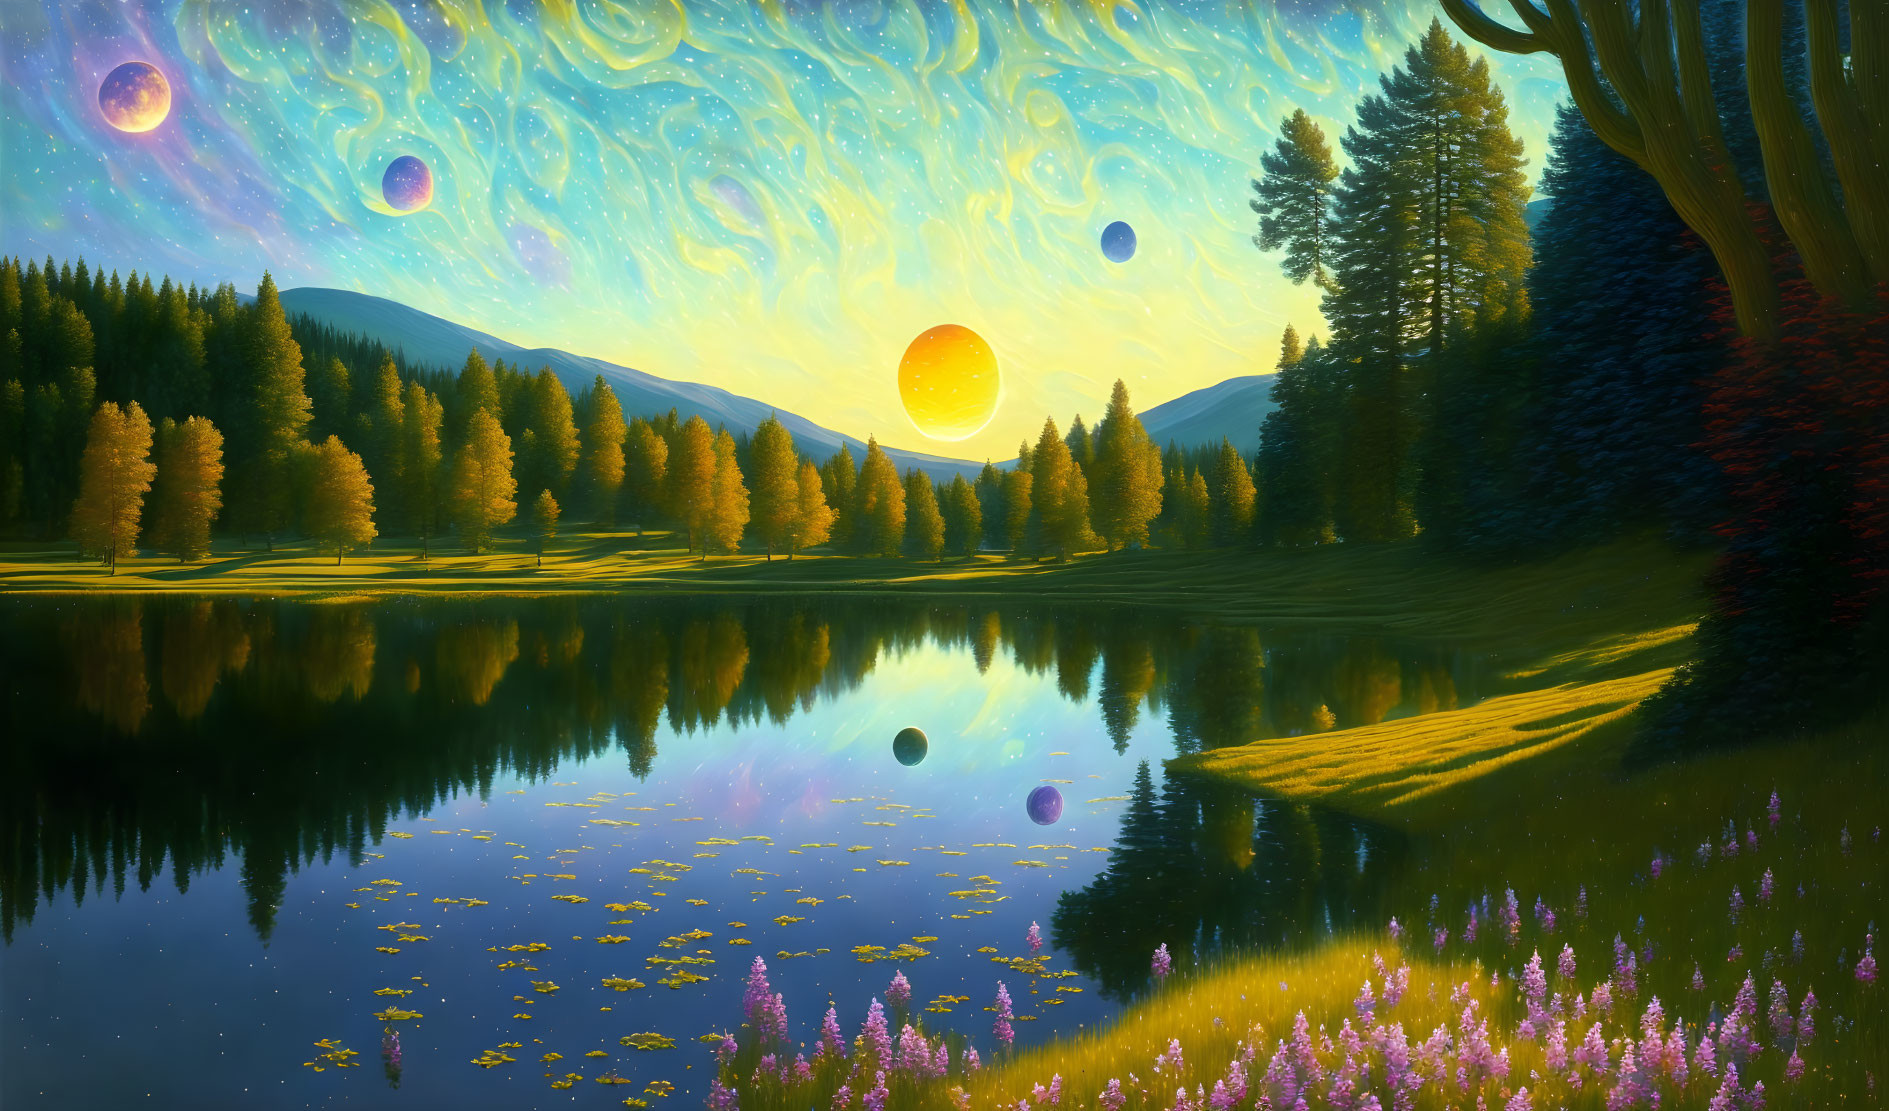 Digital landscape with reflective lake, forest, and colorful celestial bodies.